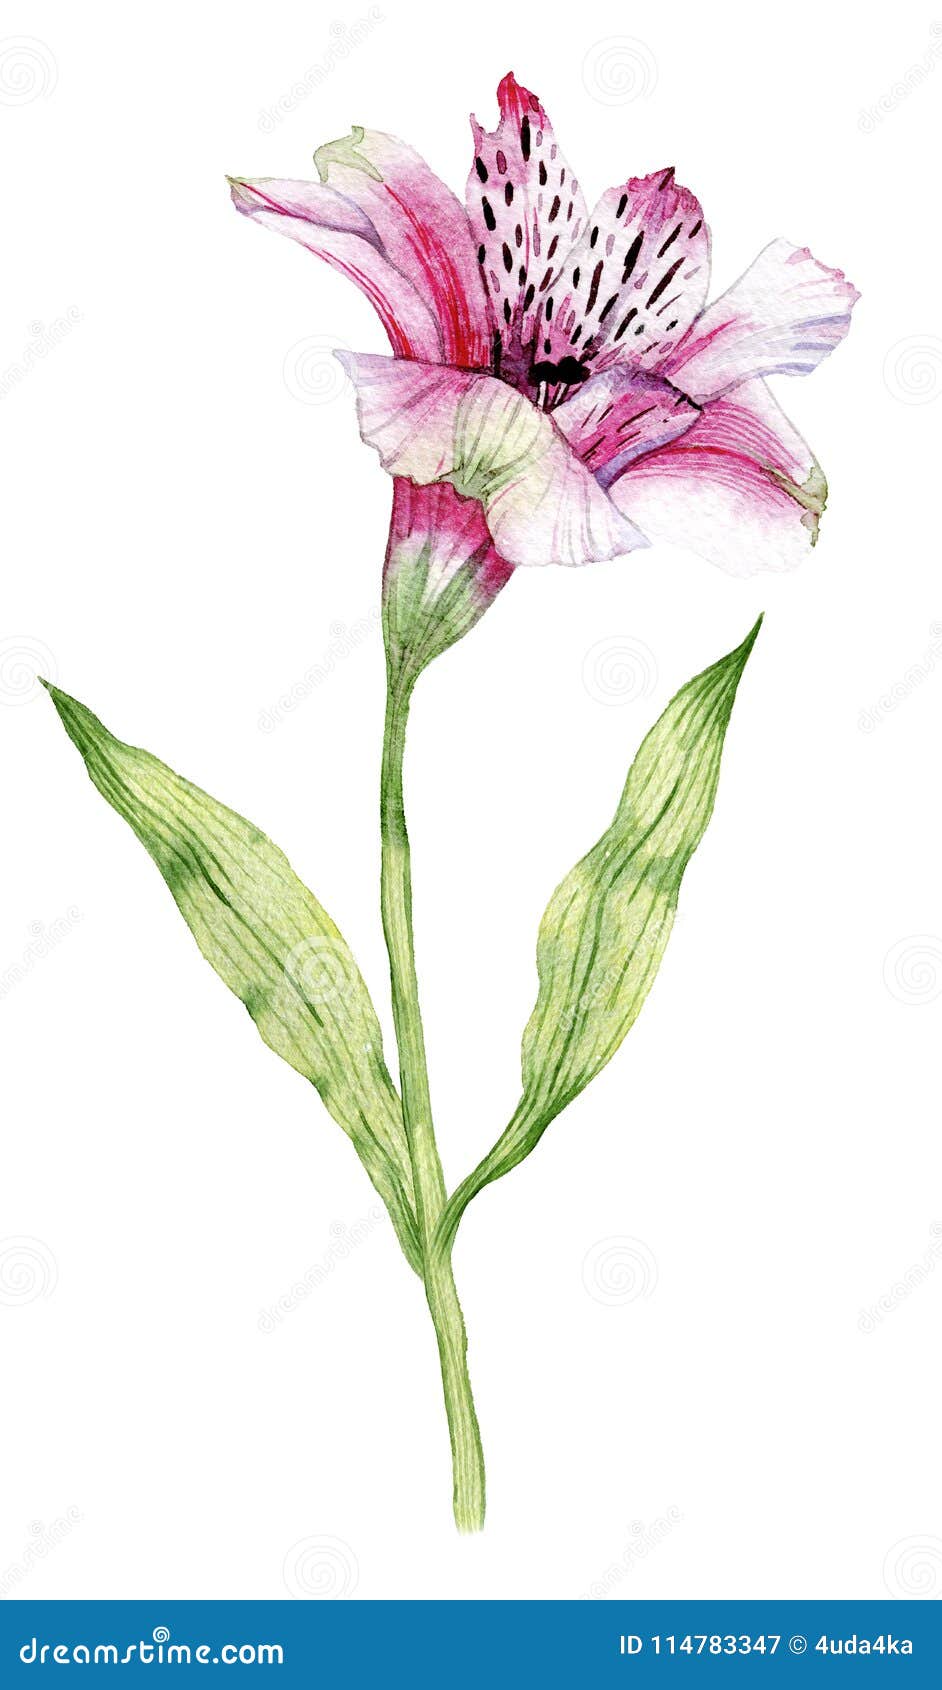 Hand Drawn Watercolor Alstroemeria Flower Stock Image - Image of ...